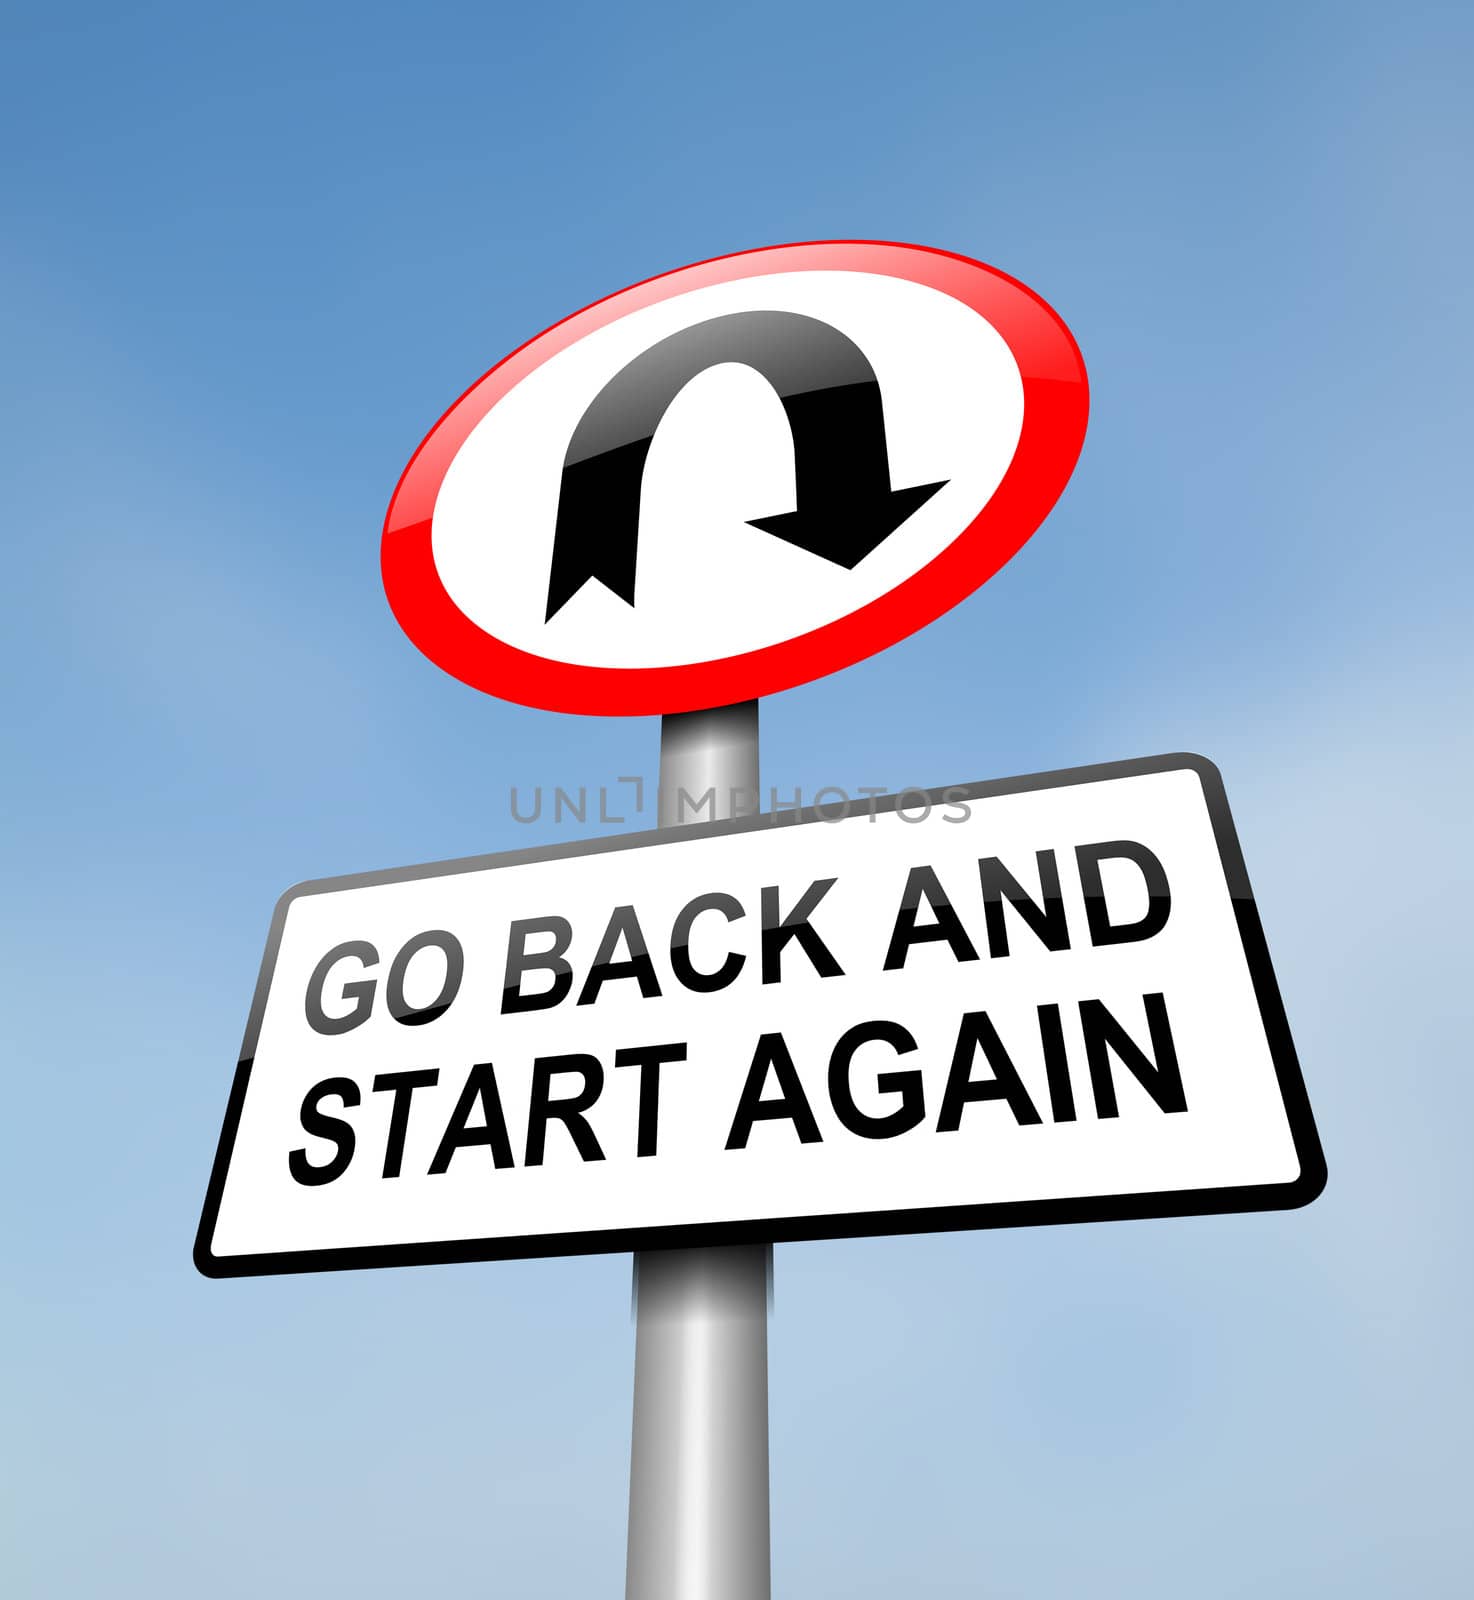 Illustration depicting a red and white road sign with a 'going back' concept. Blue sky background.